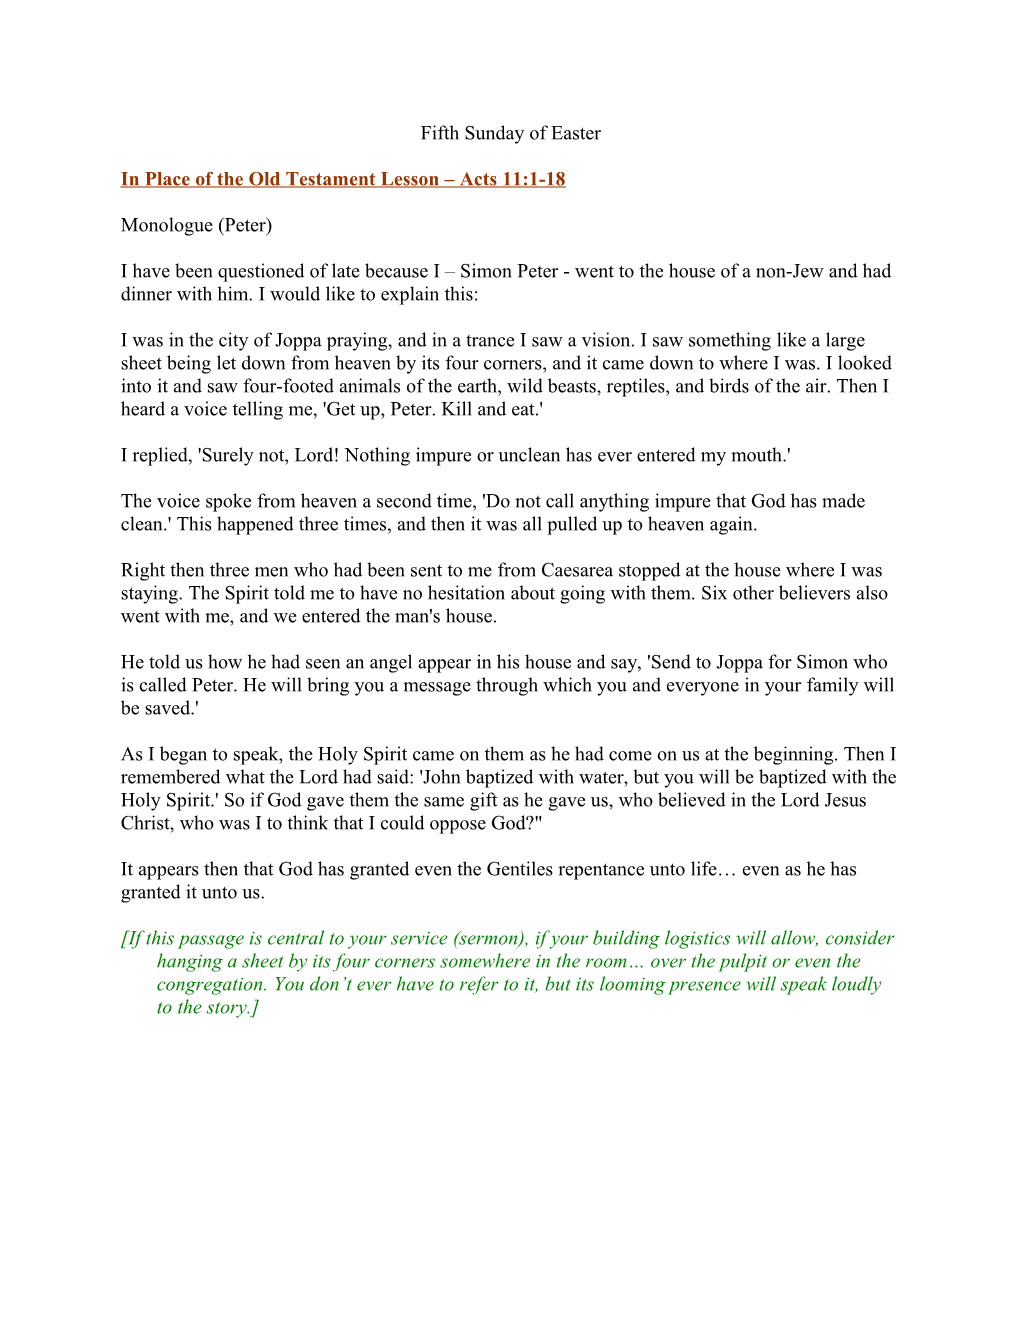 In Place of the Old Testament Lesson Acts 11:1-18